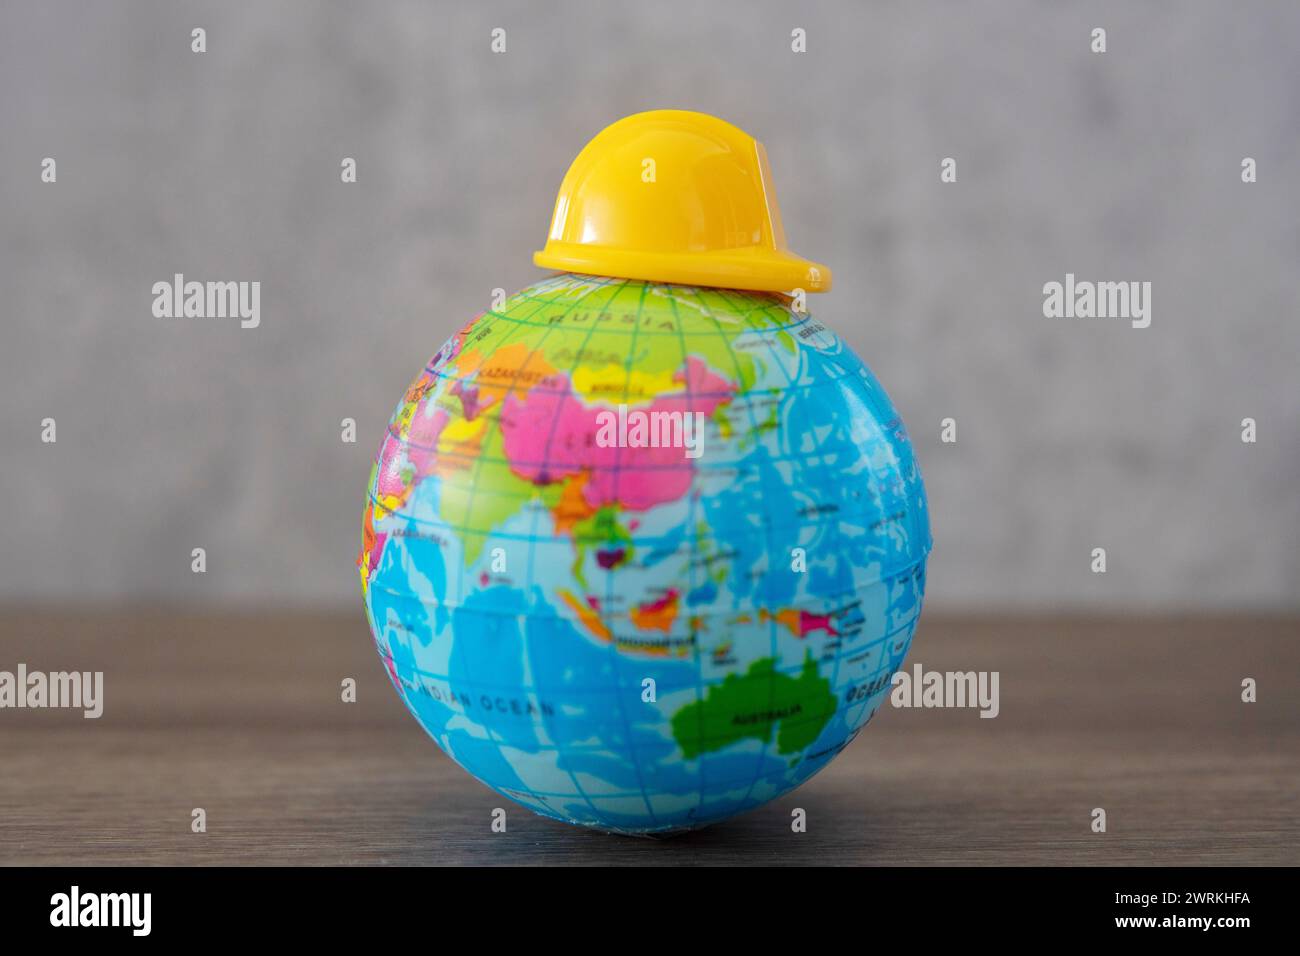 Hard hat on top of world globe. Copy space for text. Labor day, safety first concept. Stock Photo